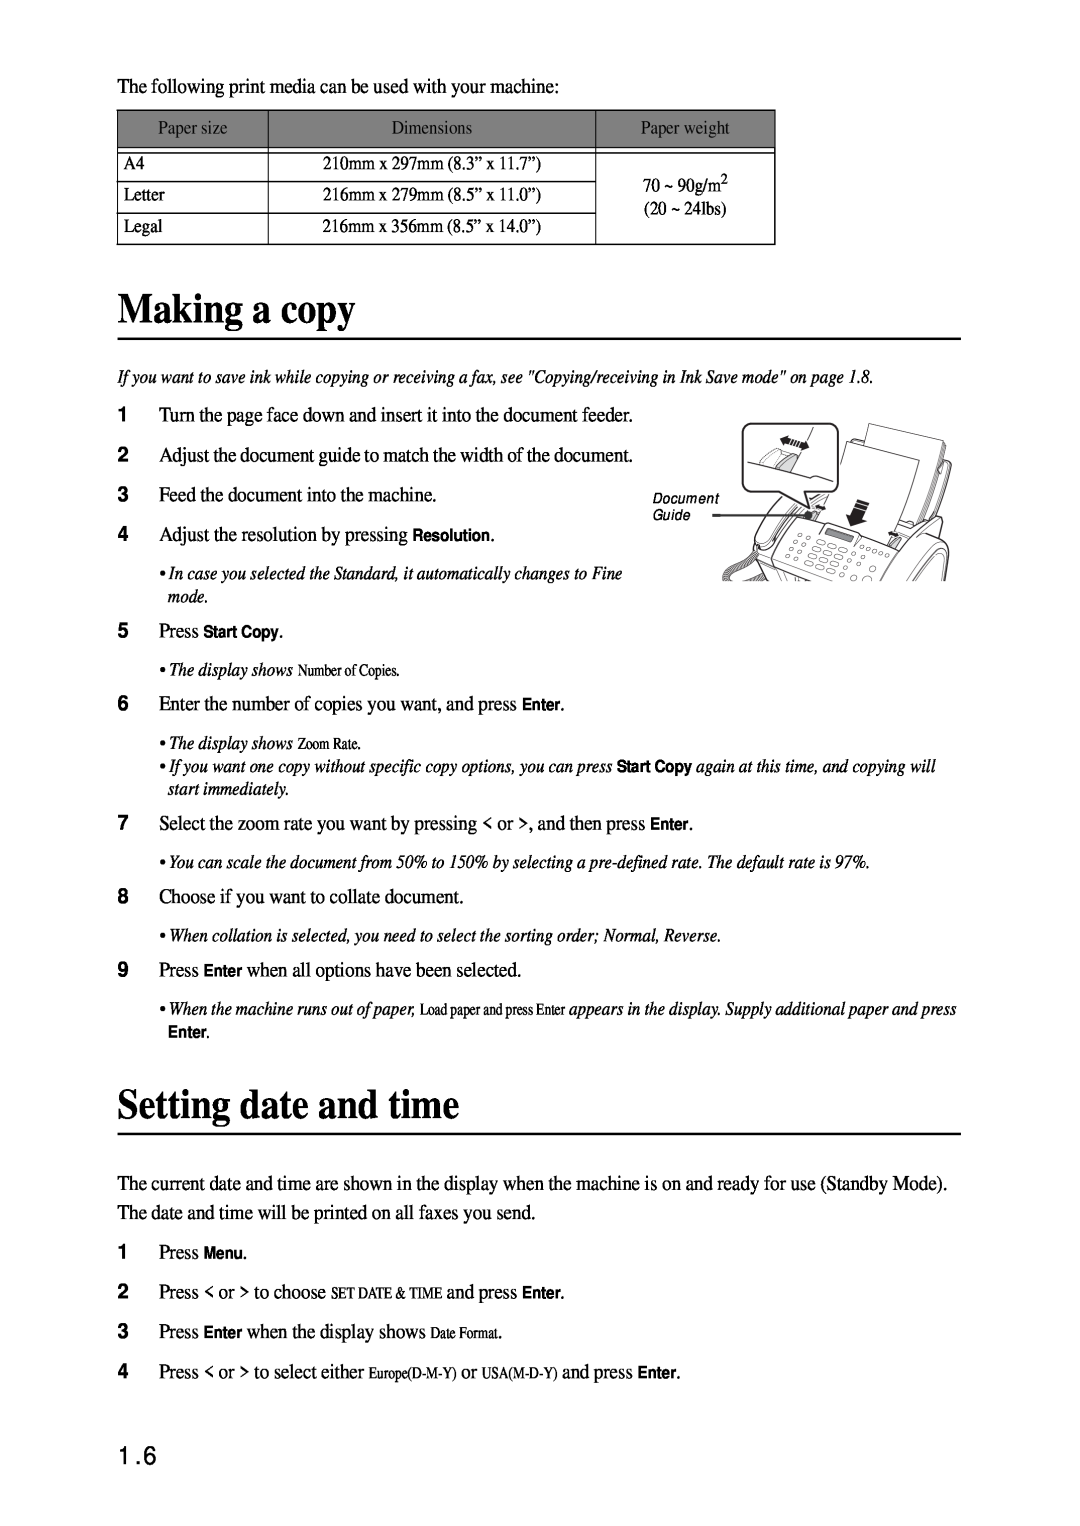 Samsung SF-340 Series manual Making a copy, Setting date and time 